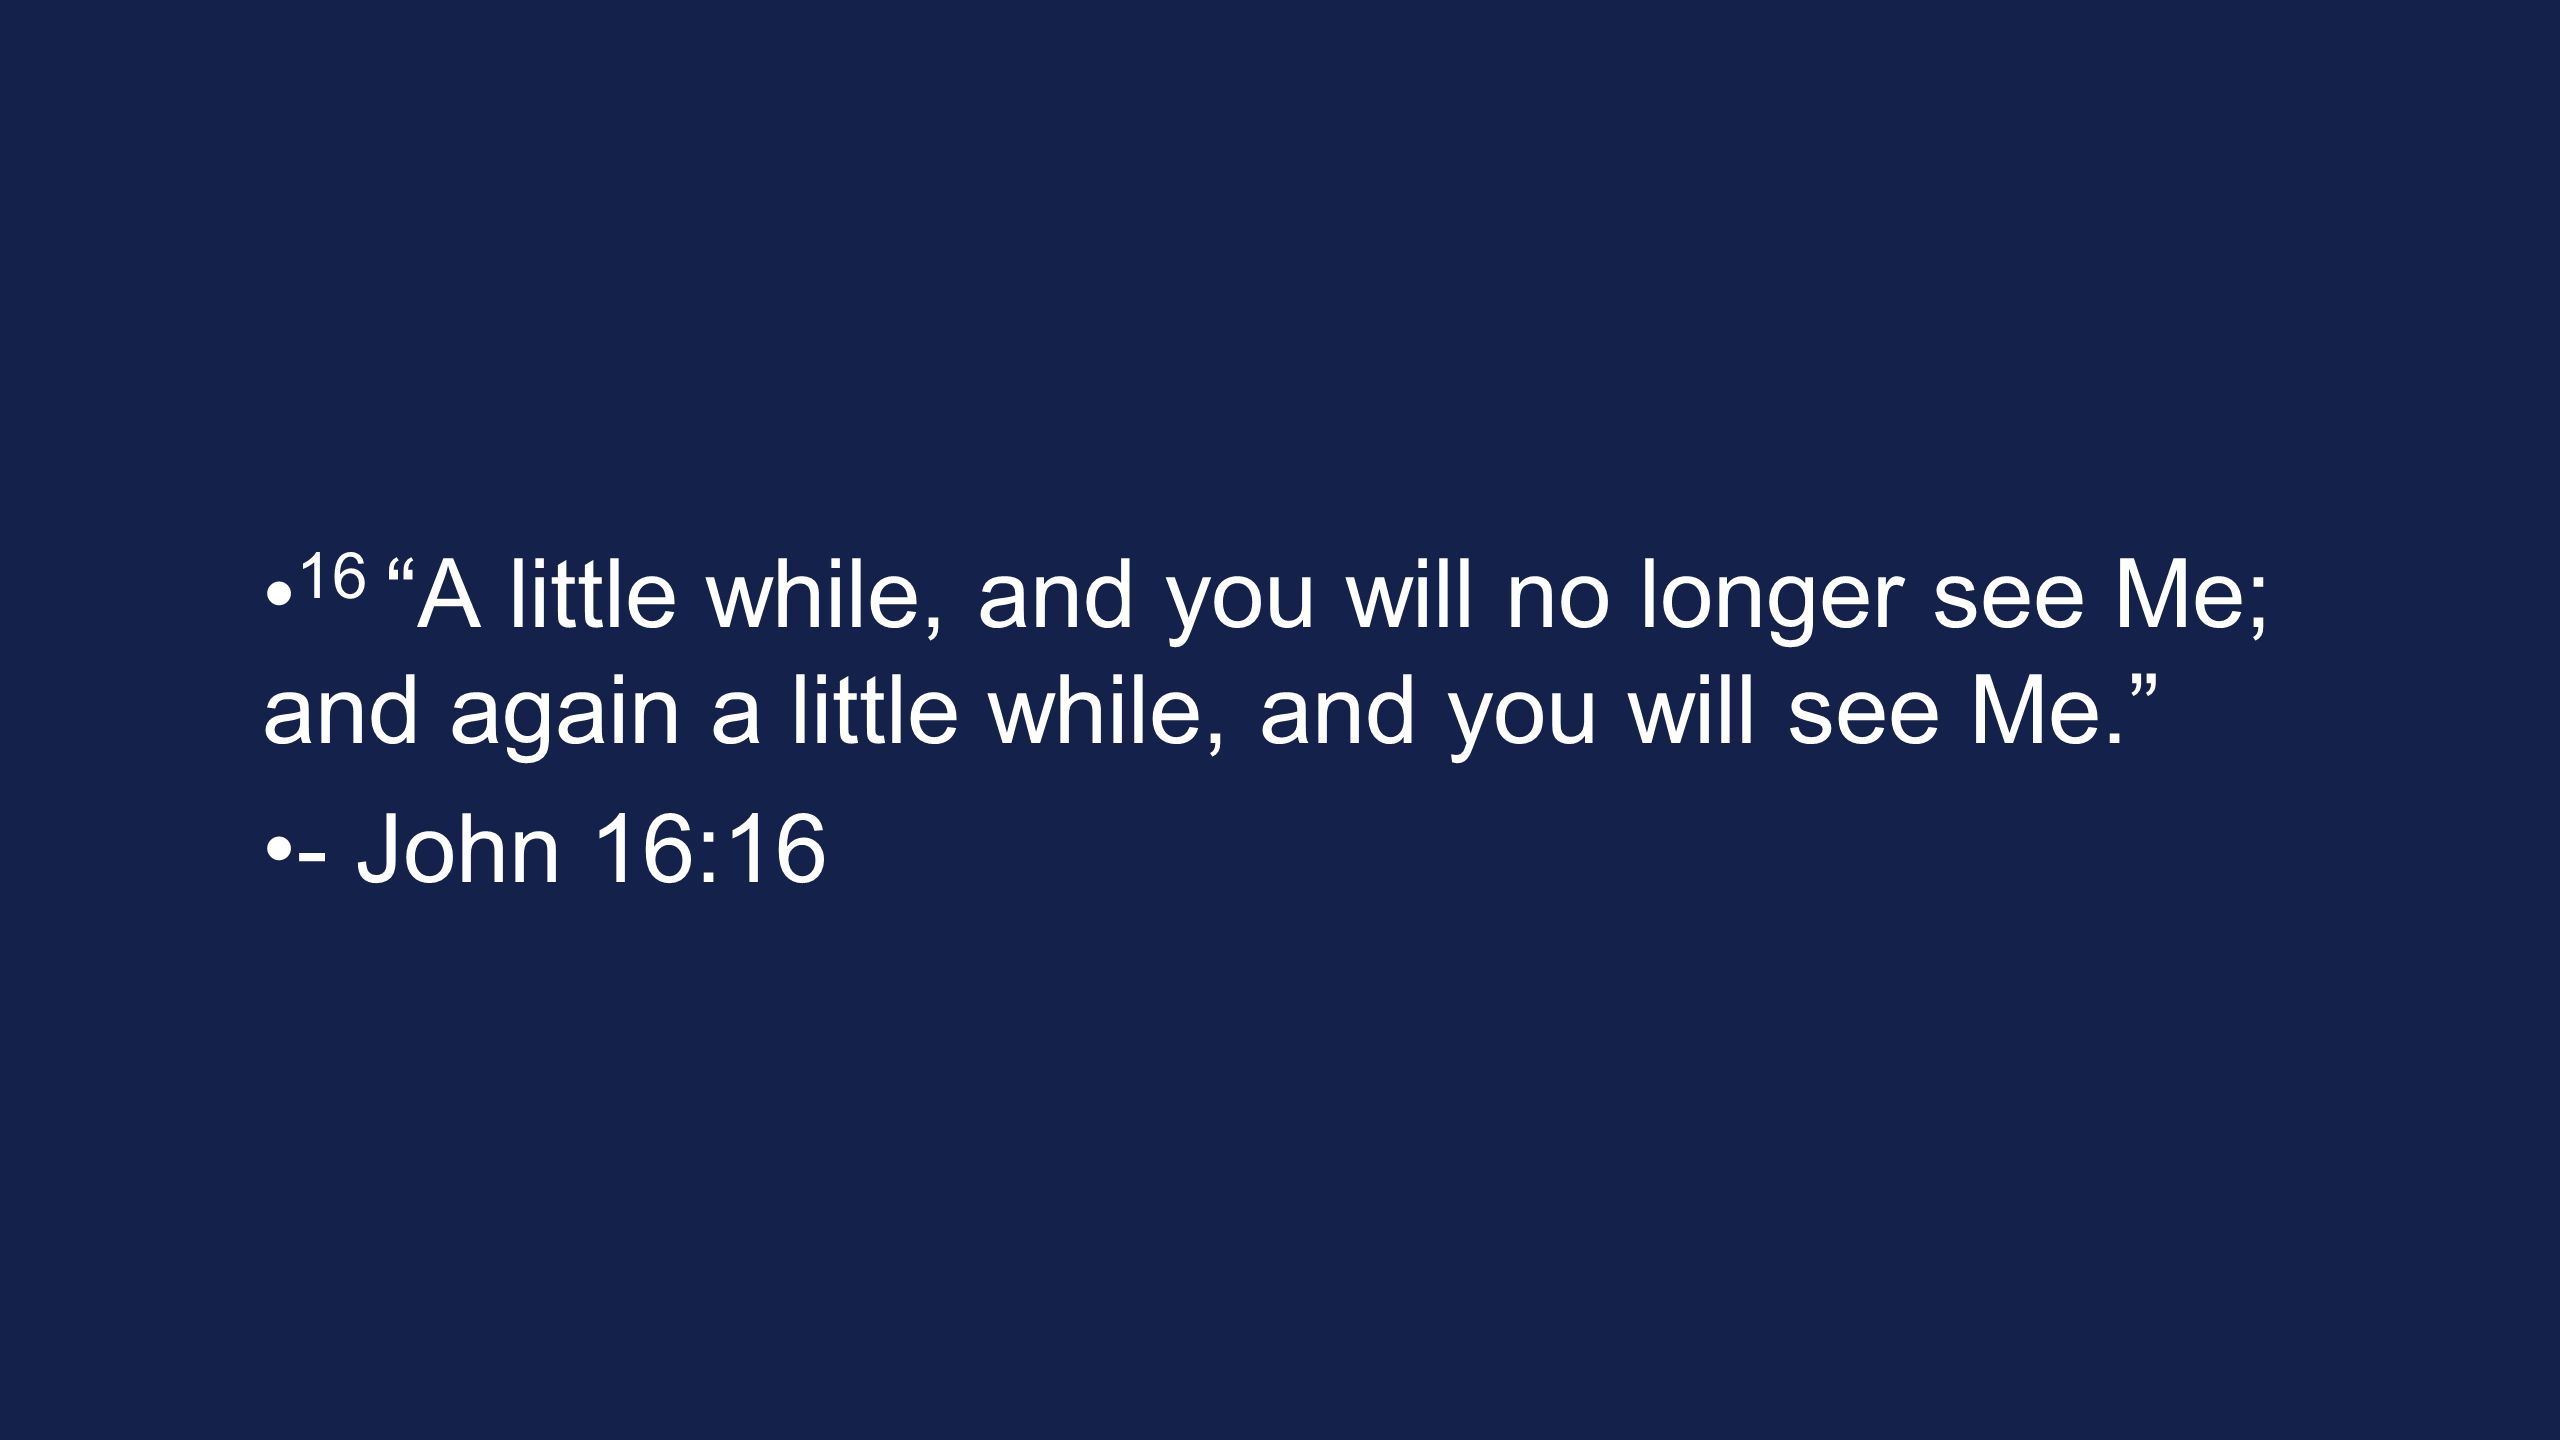 16 A little while, and you will no longer see Me; and again a little while, and you will see Me. - John 16:16